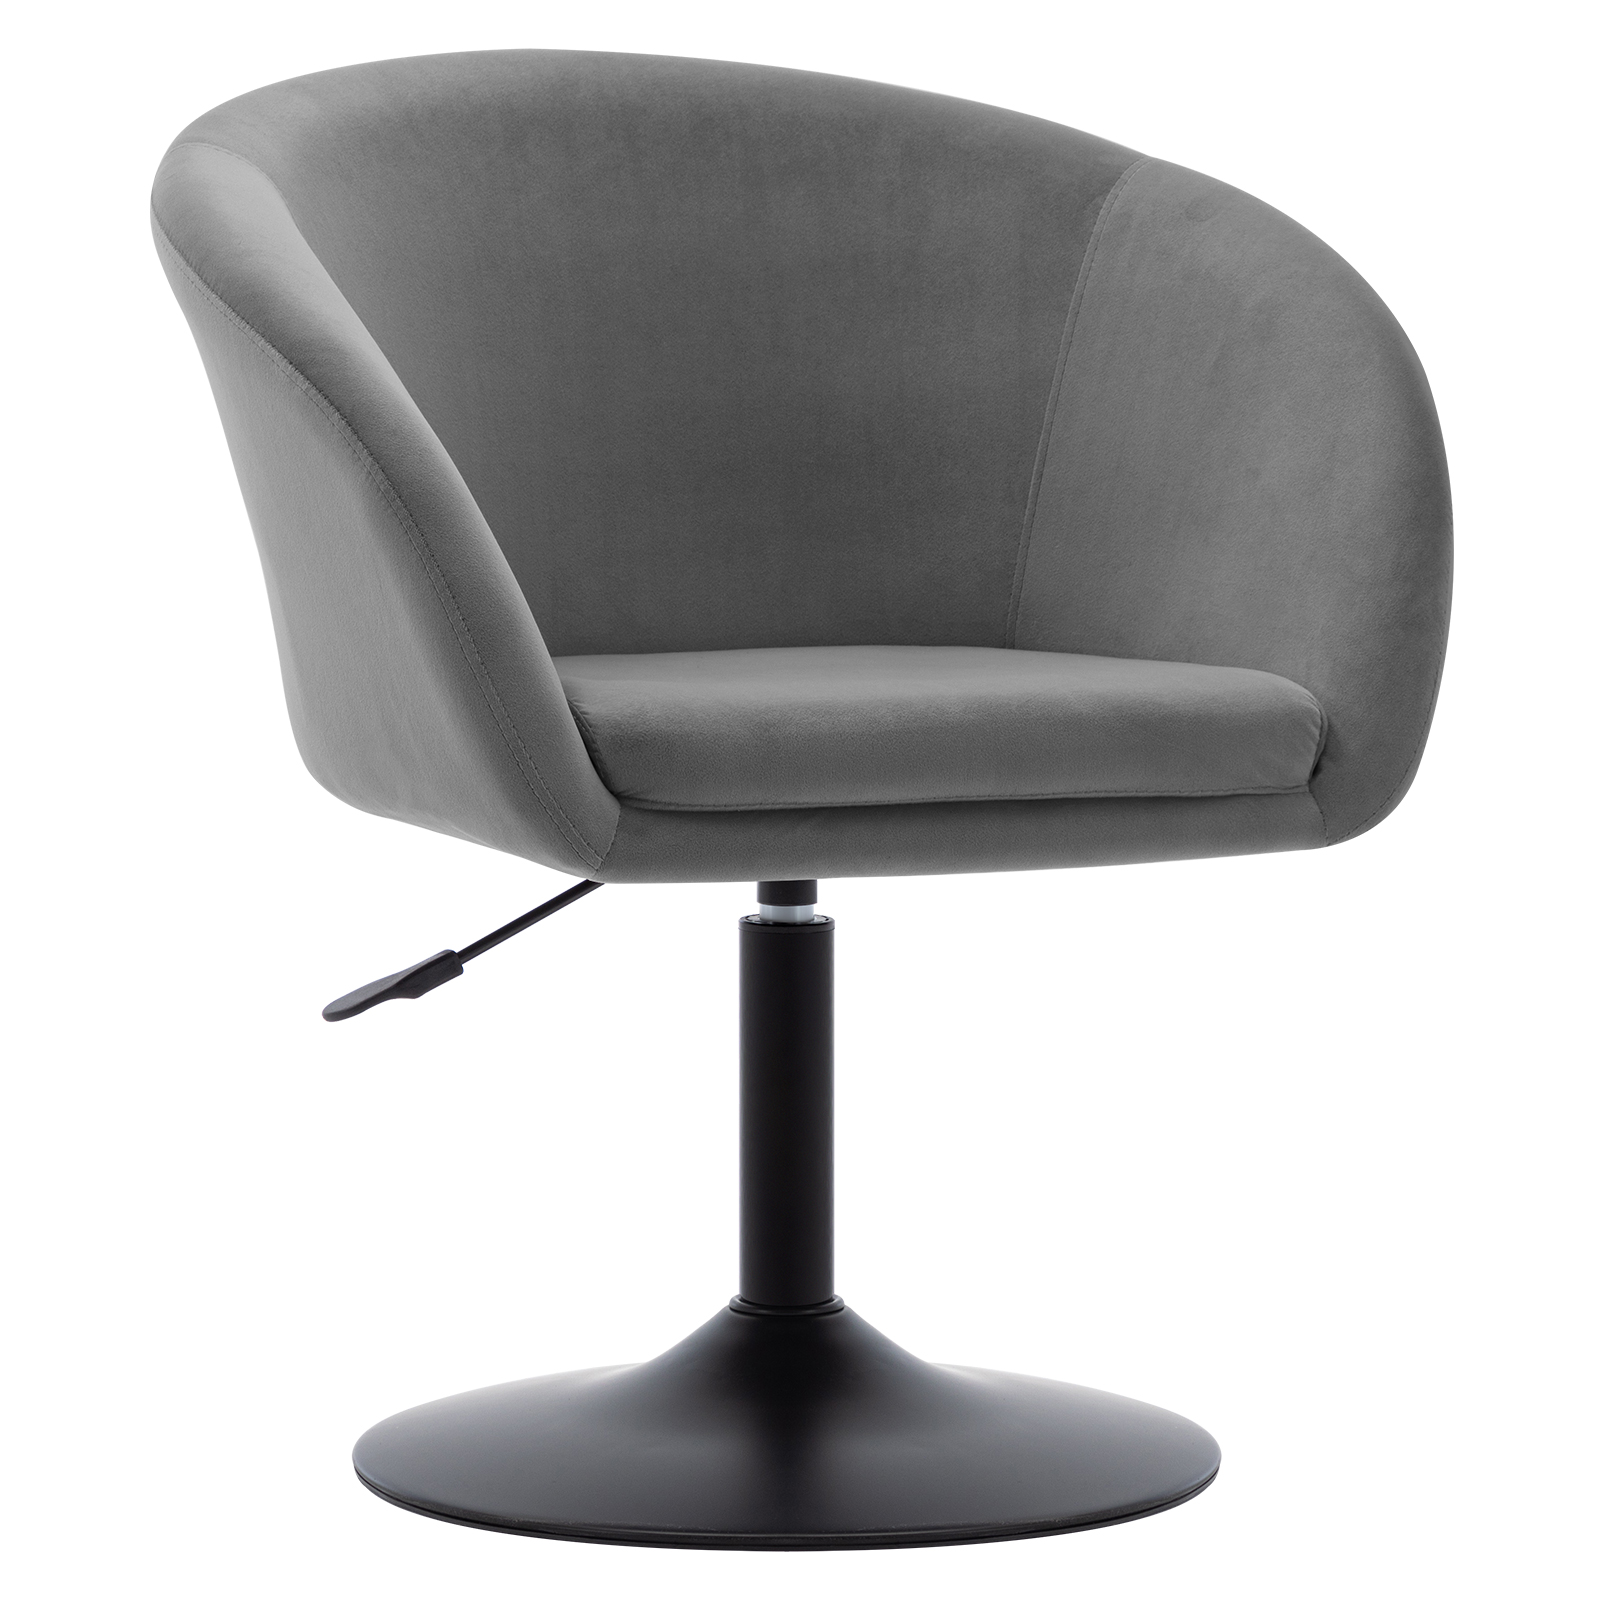 Duhome Makeup Vanity Chair Accent Chairs Comtenporary Lounge Chair Adjustable Modern Round Tufted Back Swivel Grey Velvet - image 1 of 7